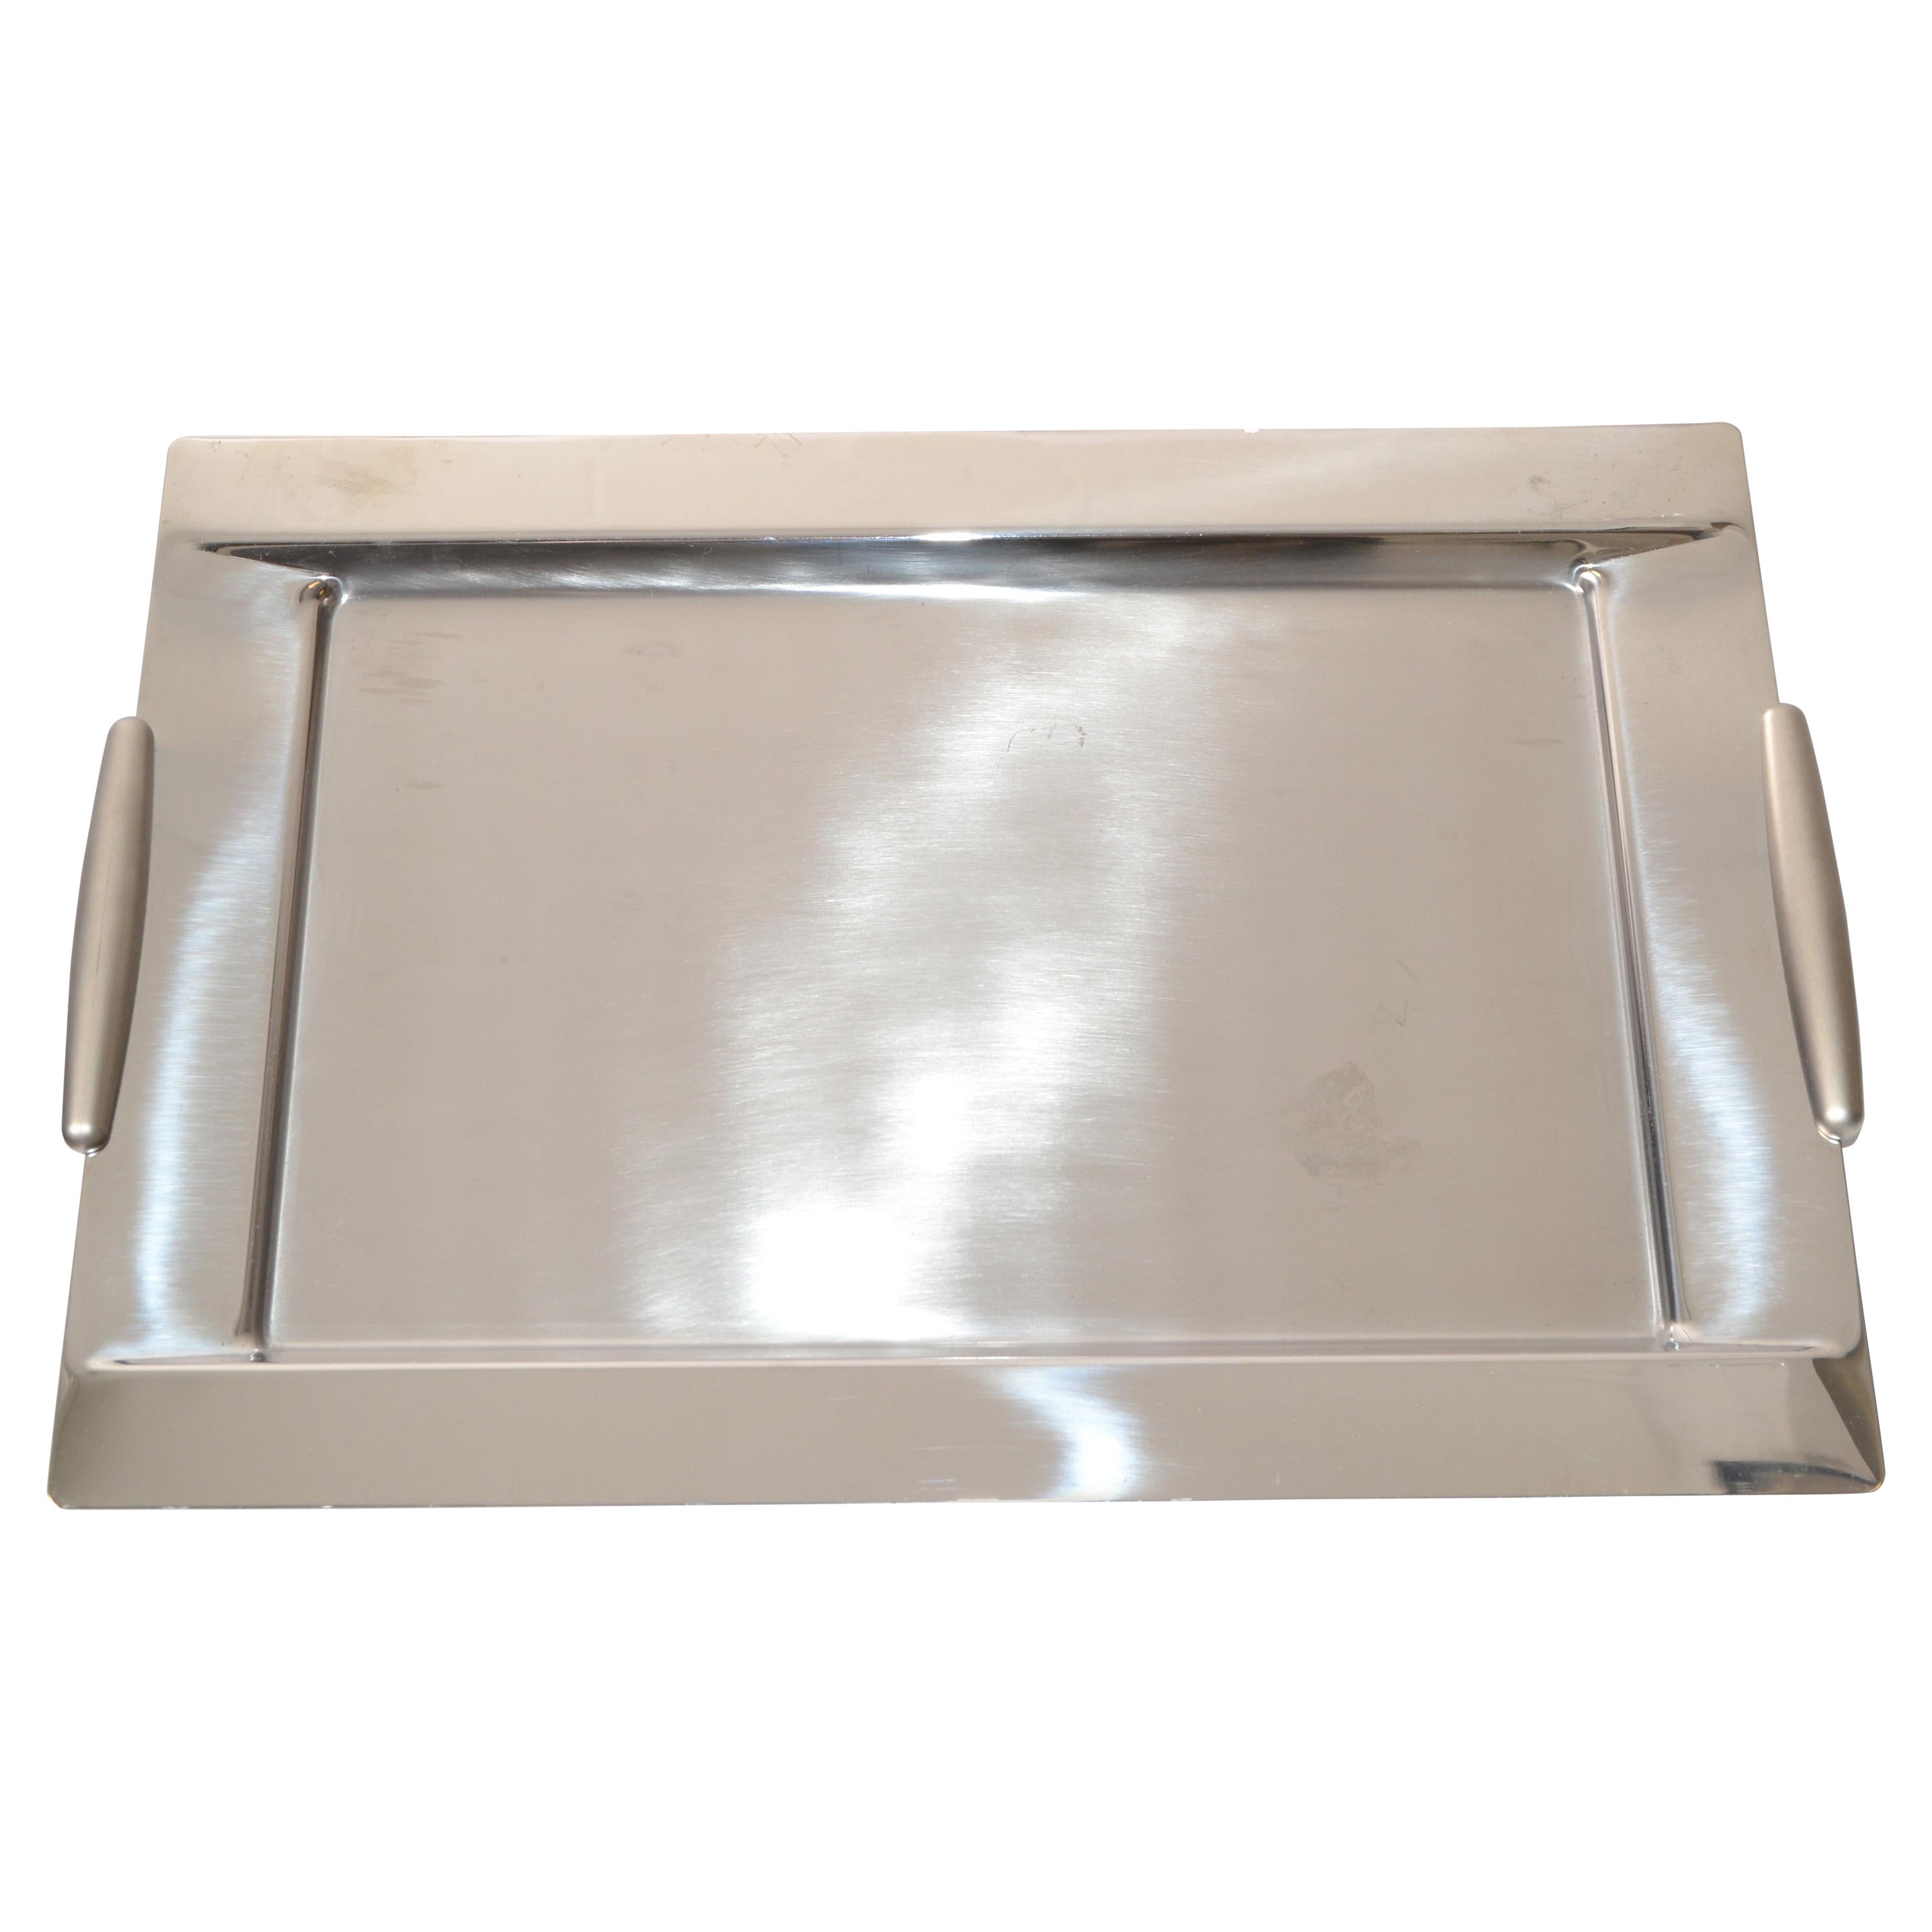 WMF Pinnacle Italy 18/10 Serving Tray Stainless Steel For Sale